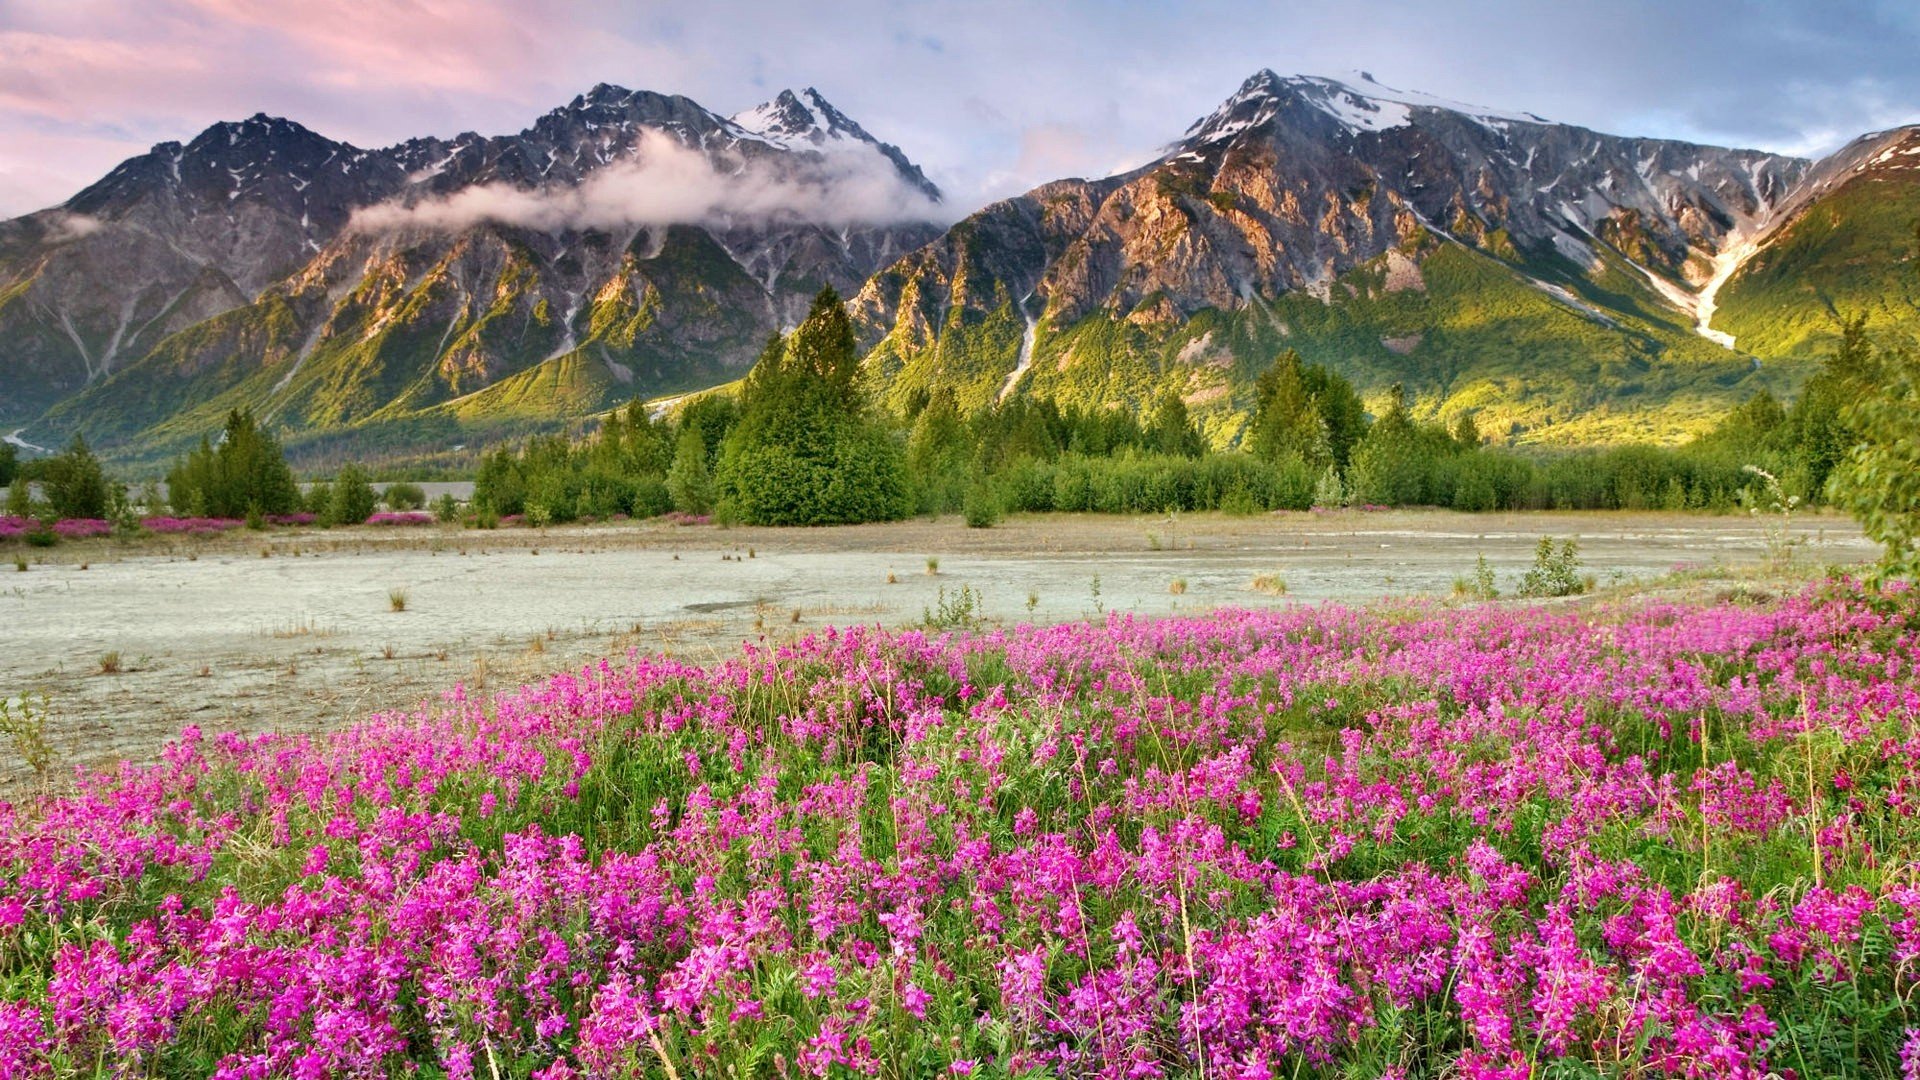 mountains, Landscapes, Nature, Canada, British, Columbia, Land, Pink, Flowers, Wildflowers Wallpaper